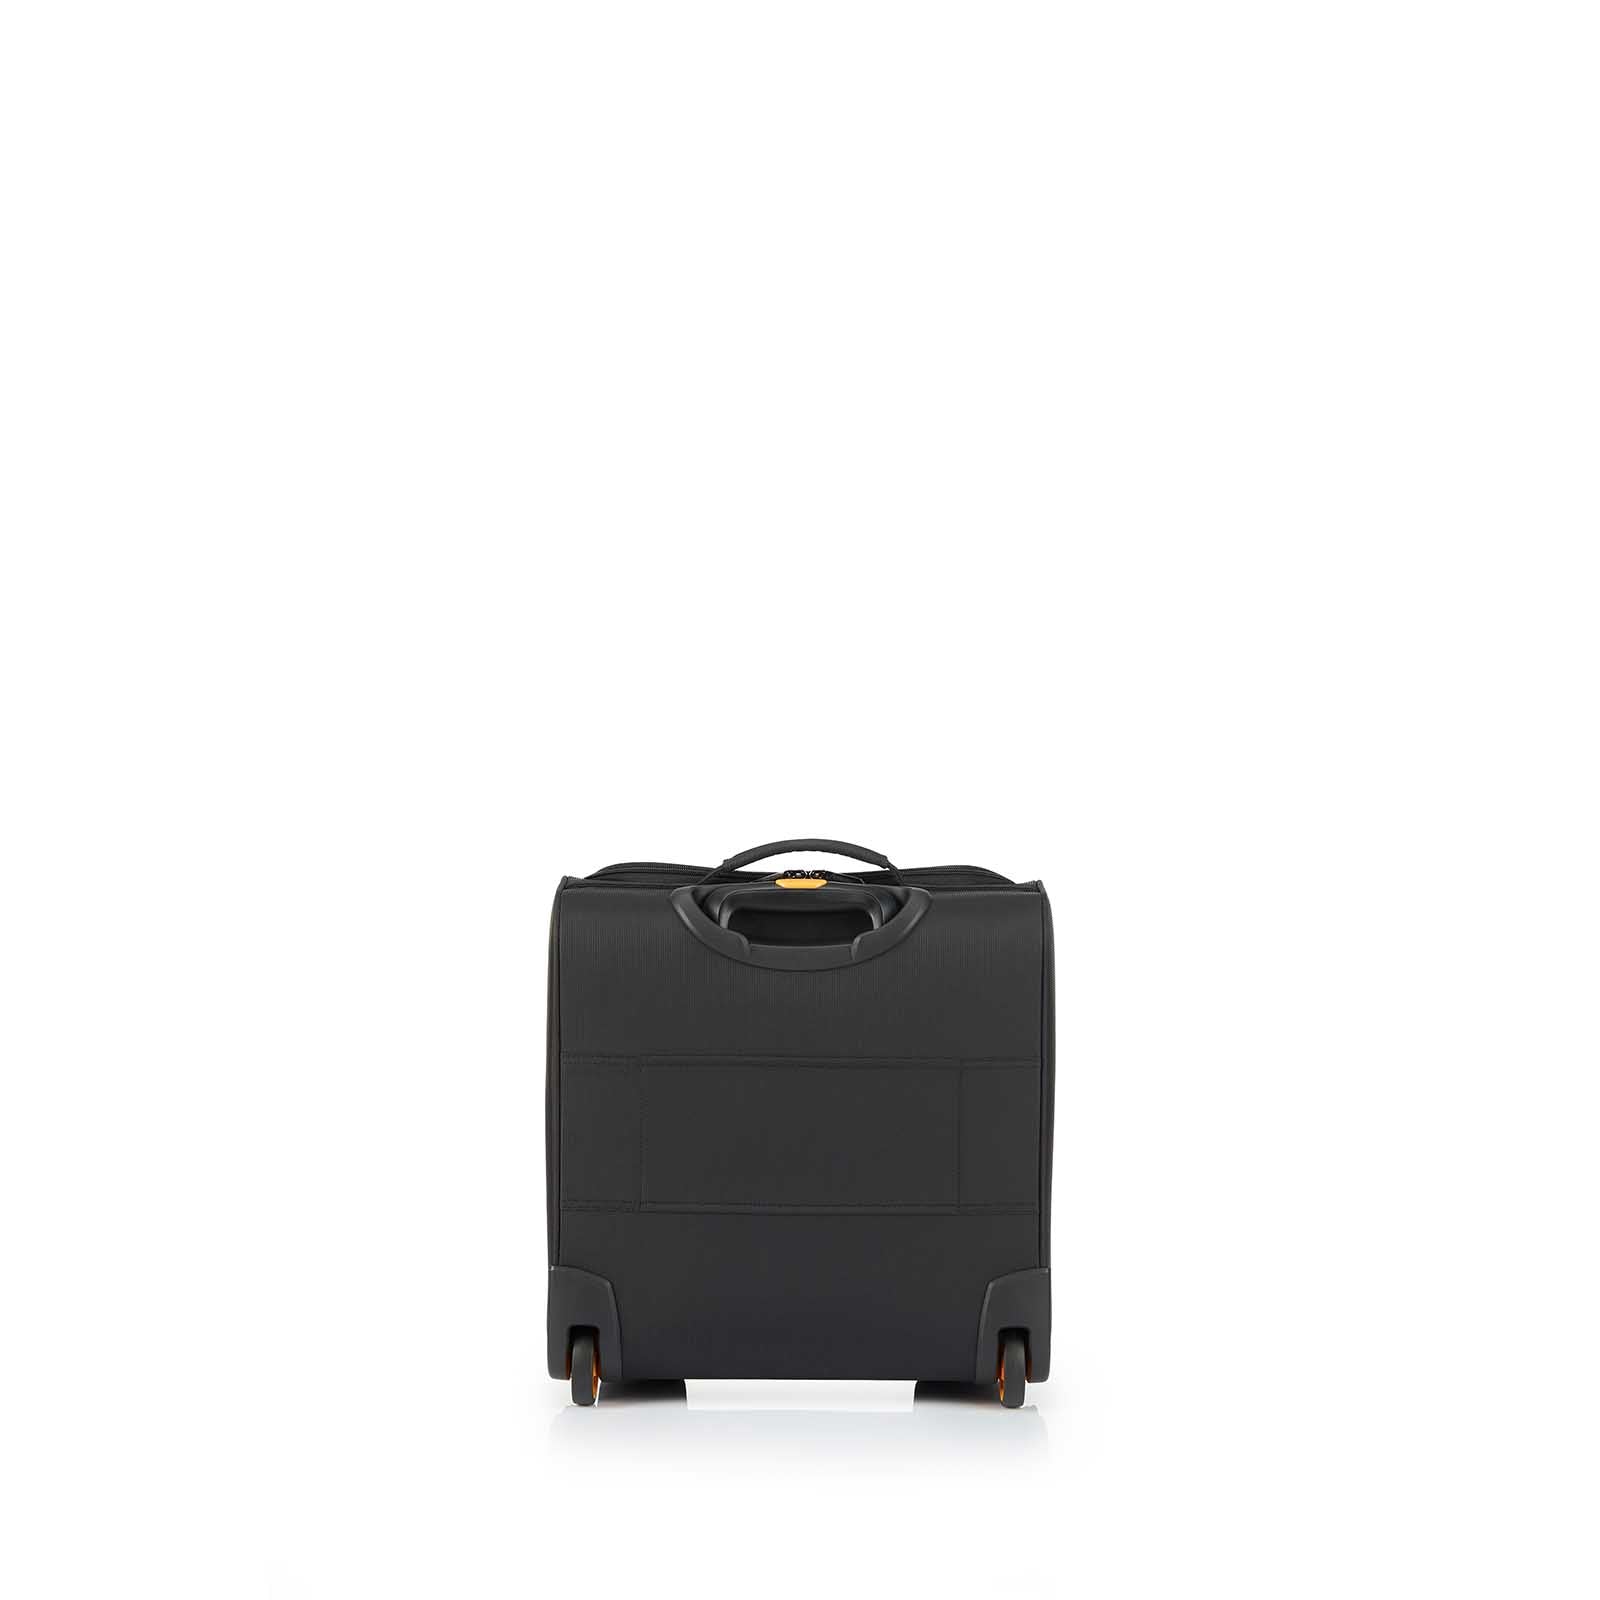 American-Tourister-Applite-4-Eco-Underseater-Suitcase-Black-Mustard-Back